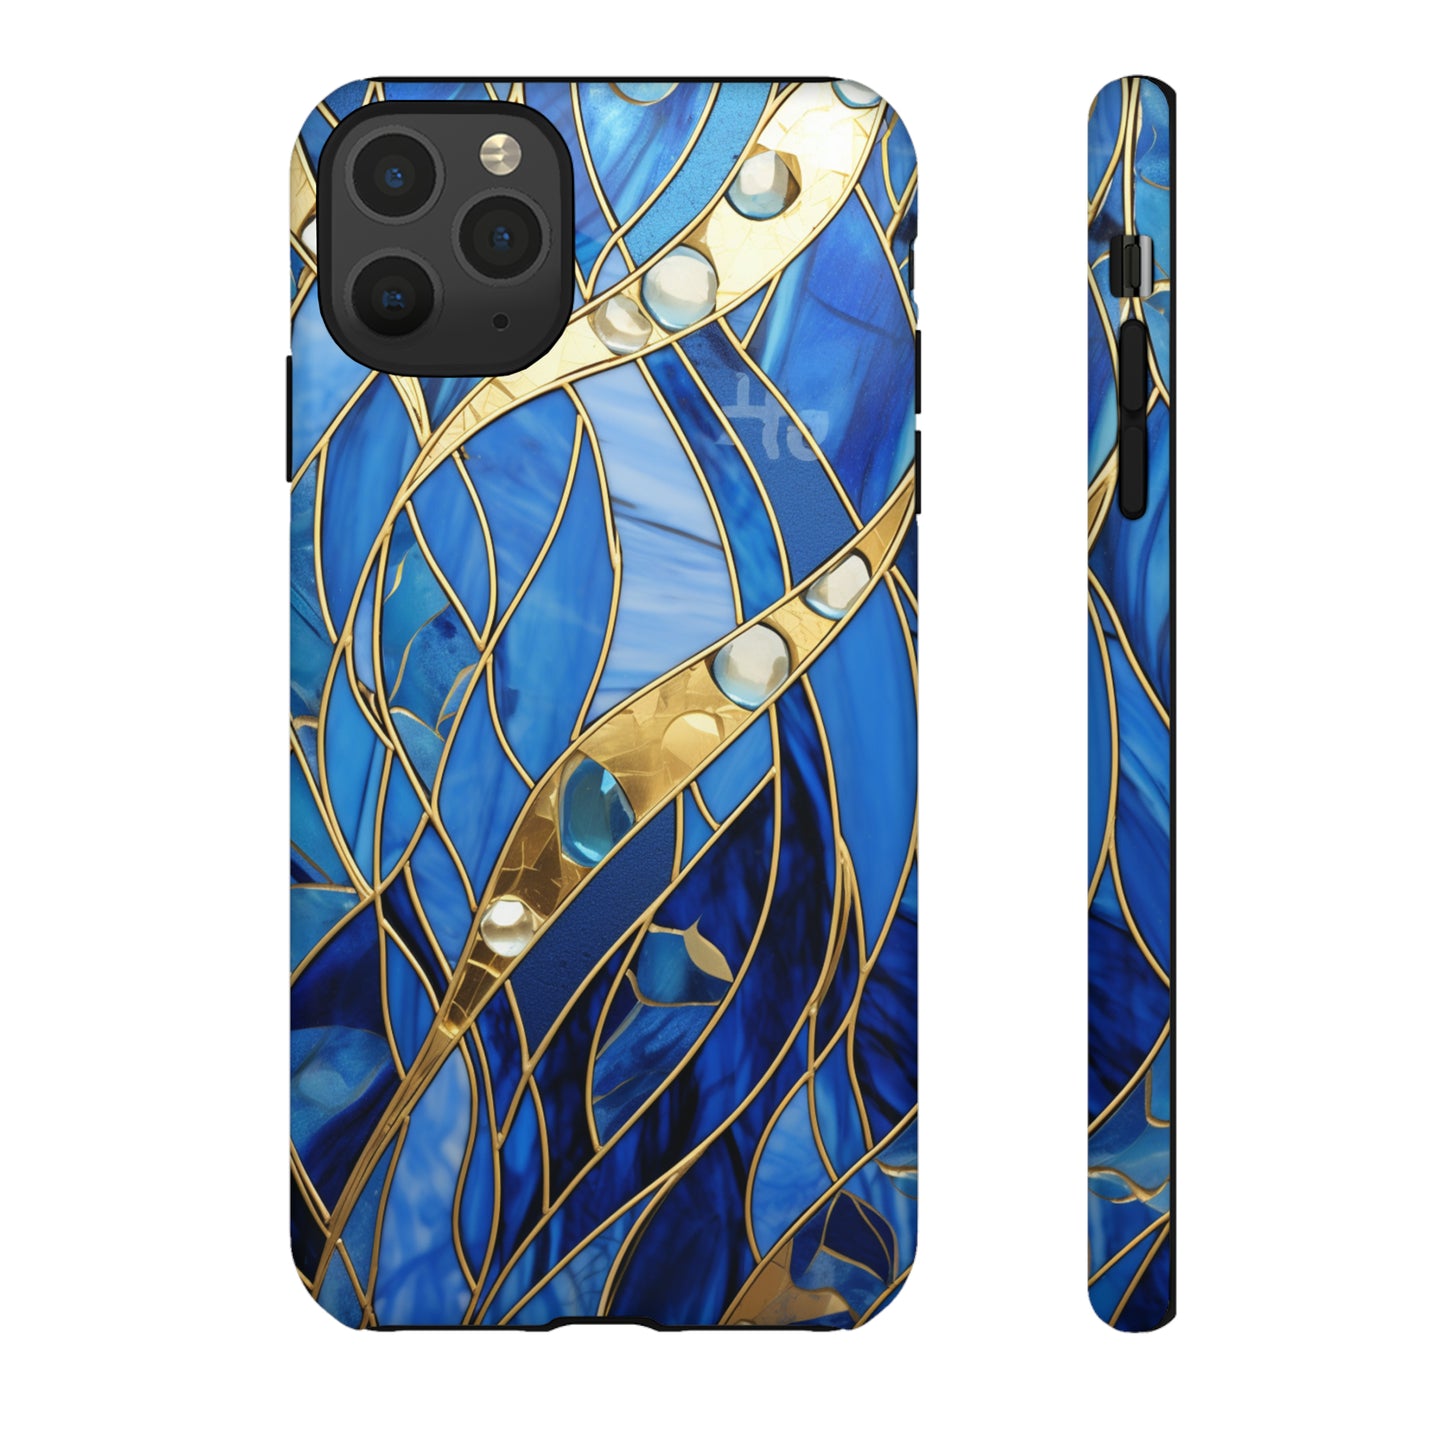 Periwinkle Blue Stained Glass with Gold Inlay